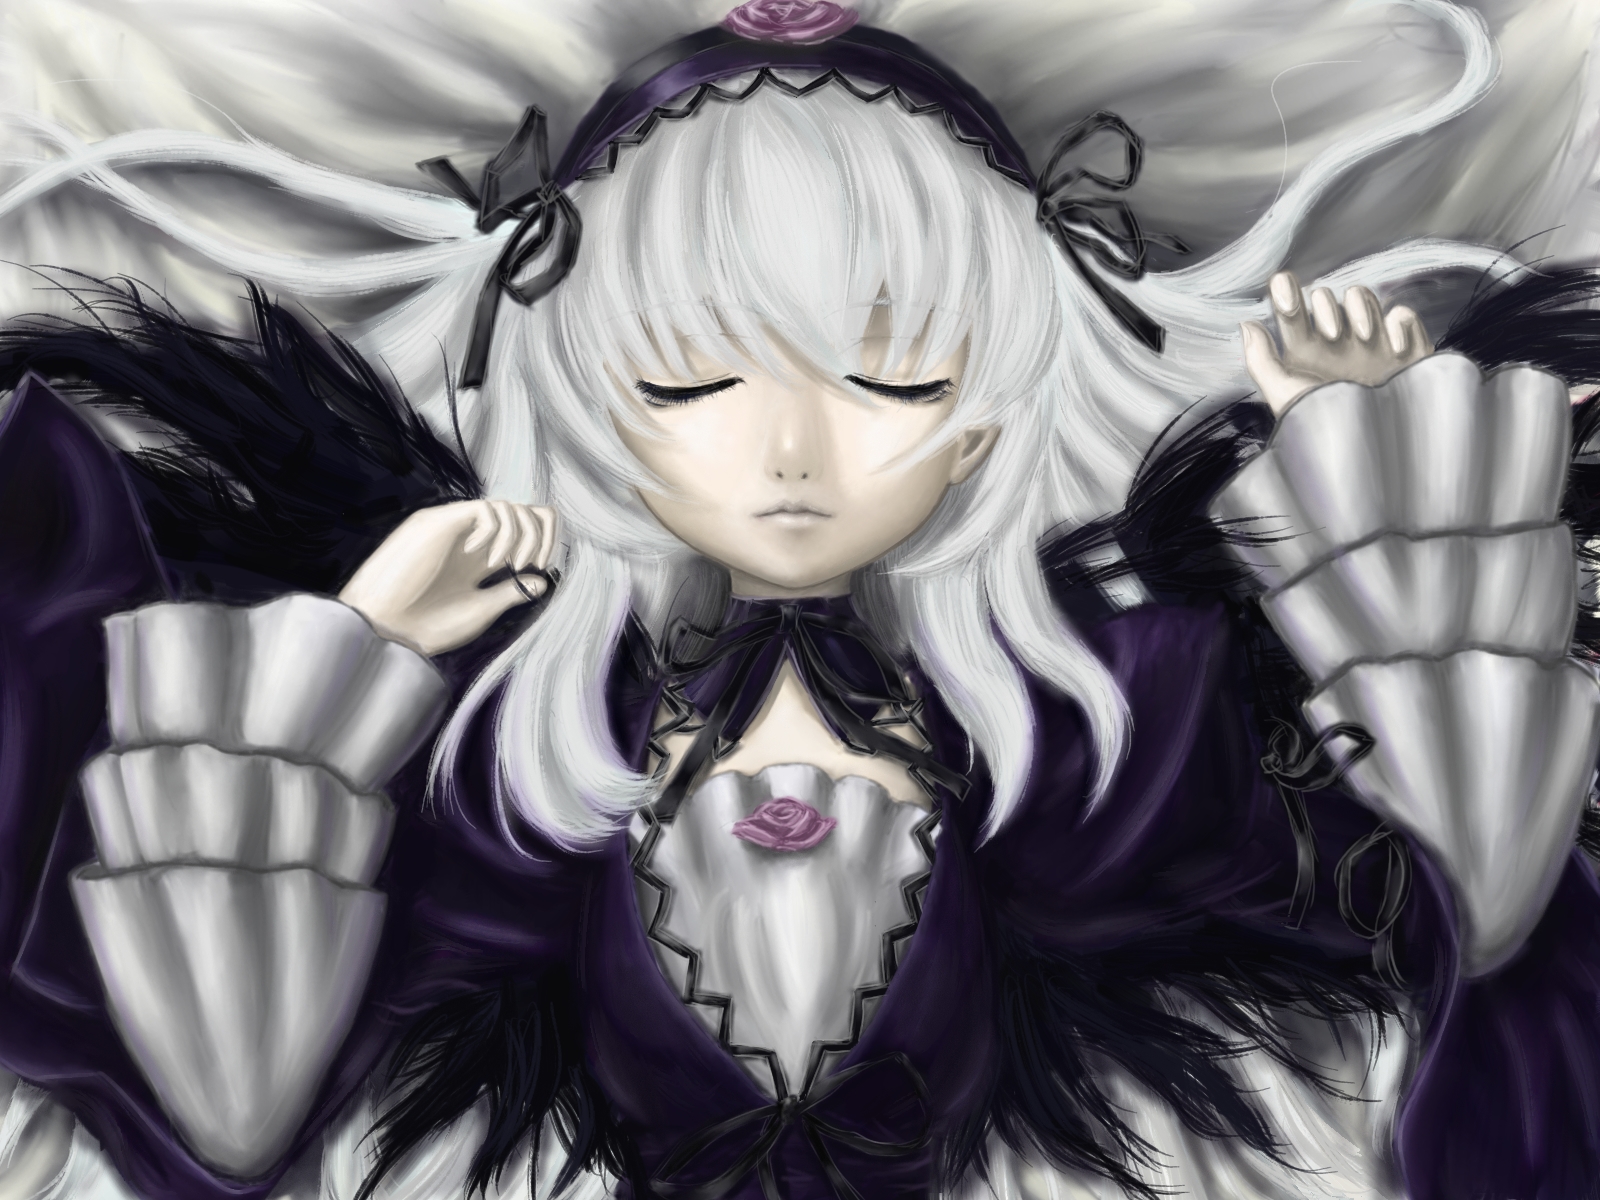 Suigintou, a character from Rozen Maiden, against a high-definition wallpaper background.